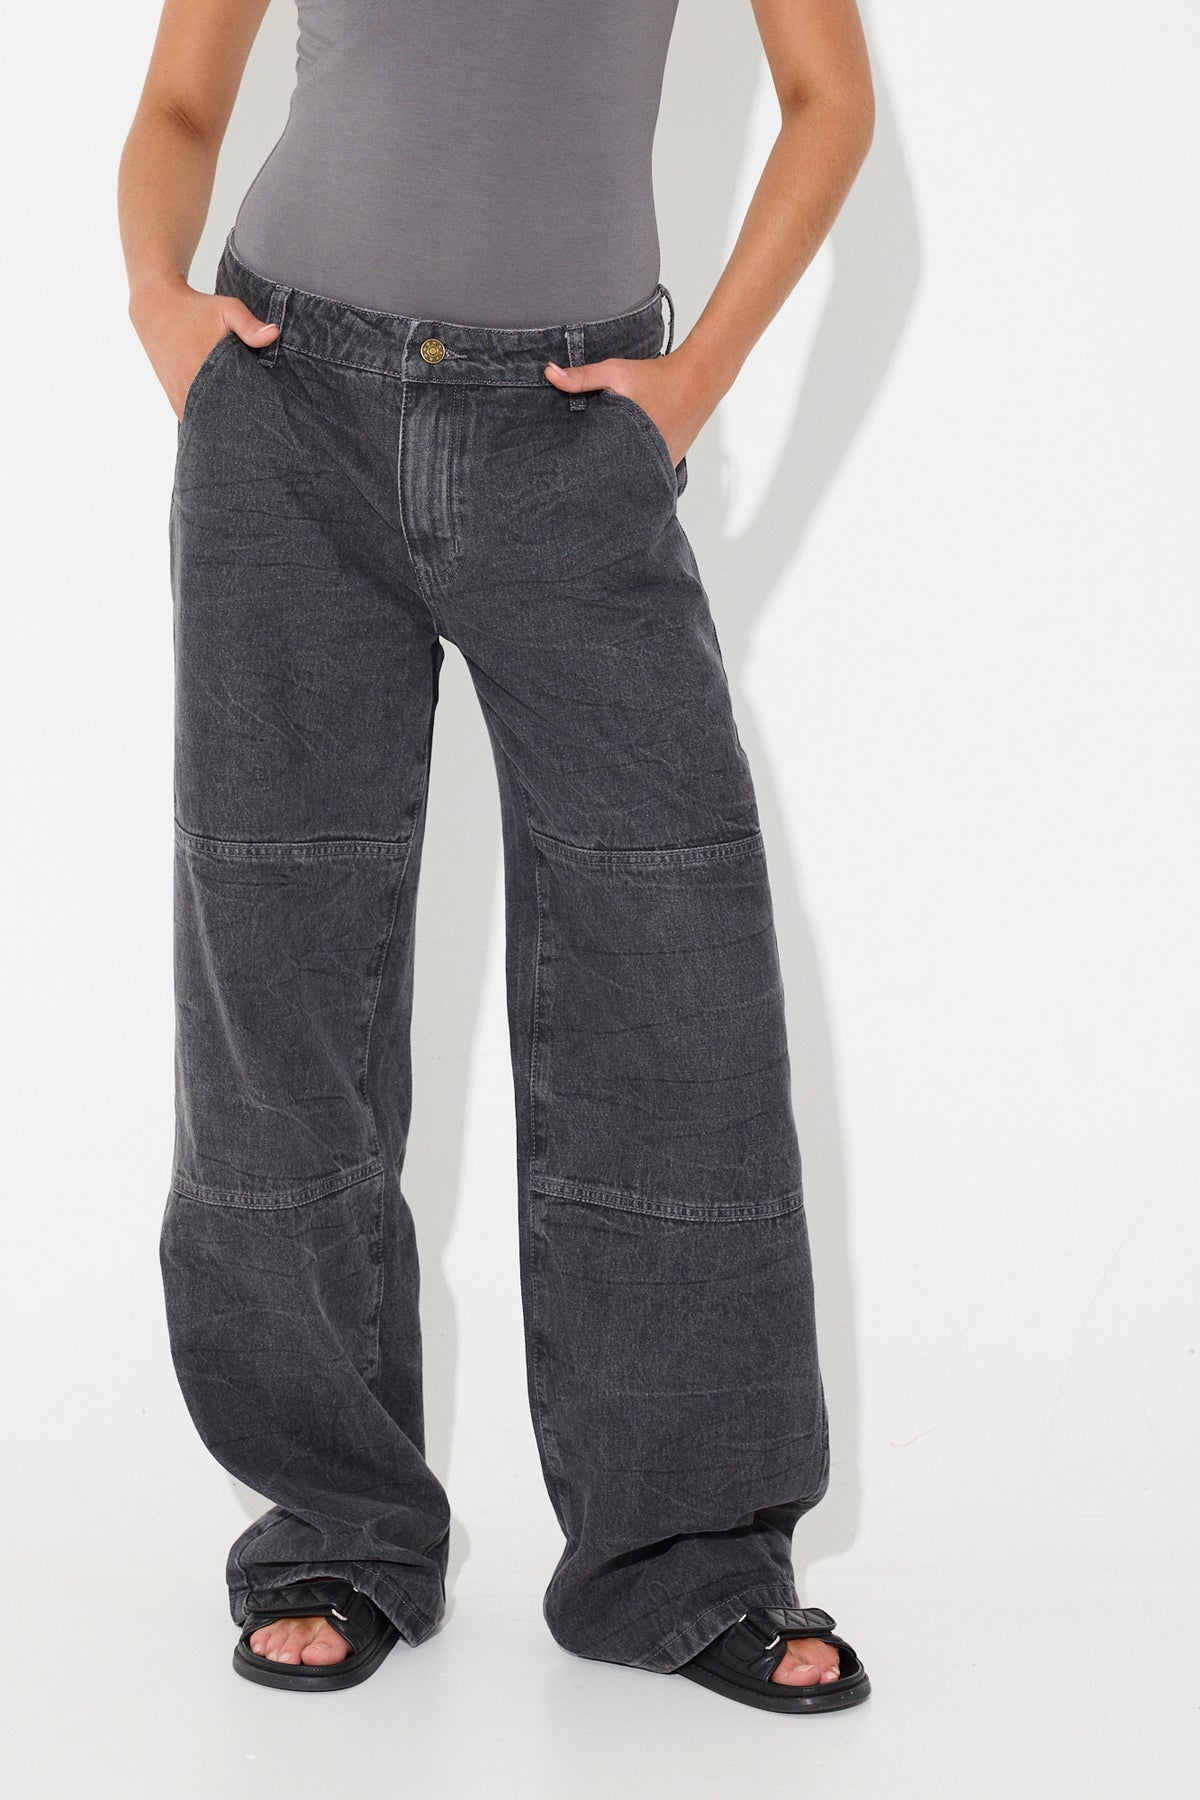 Freedom Jean Washed Charcoal